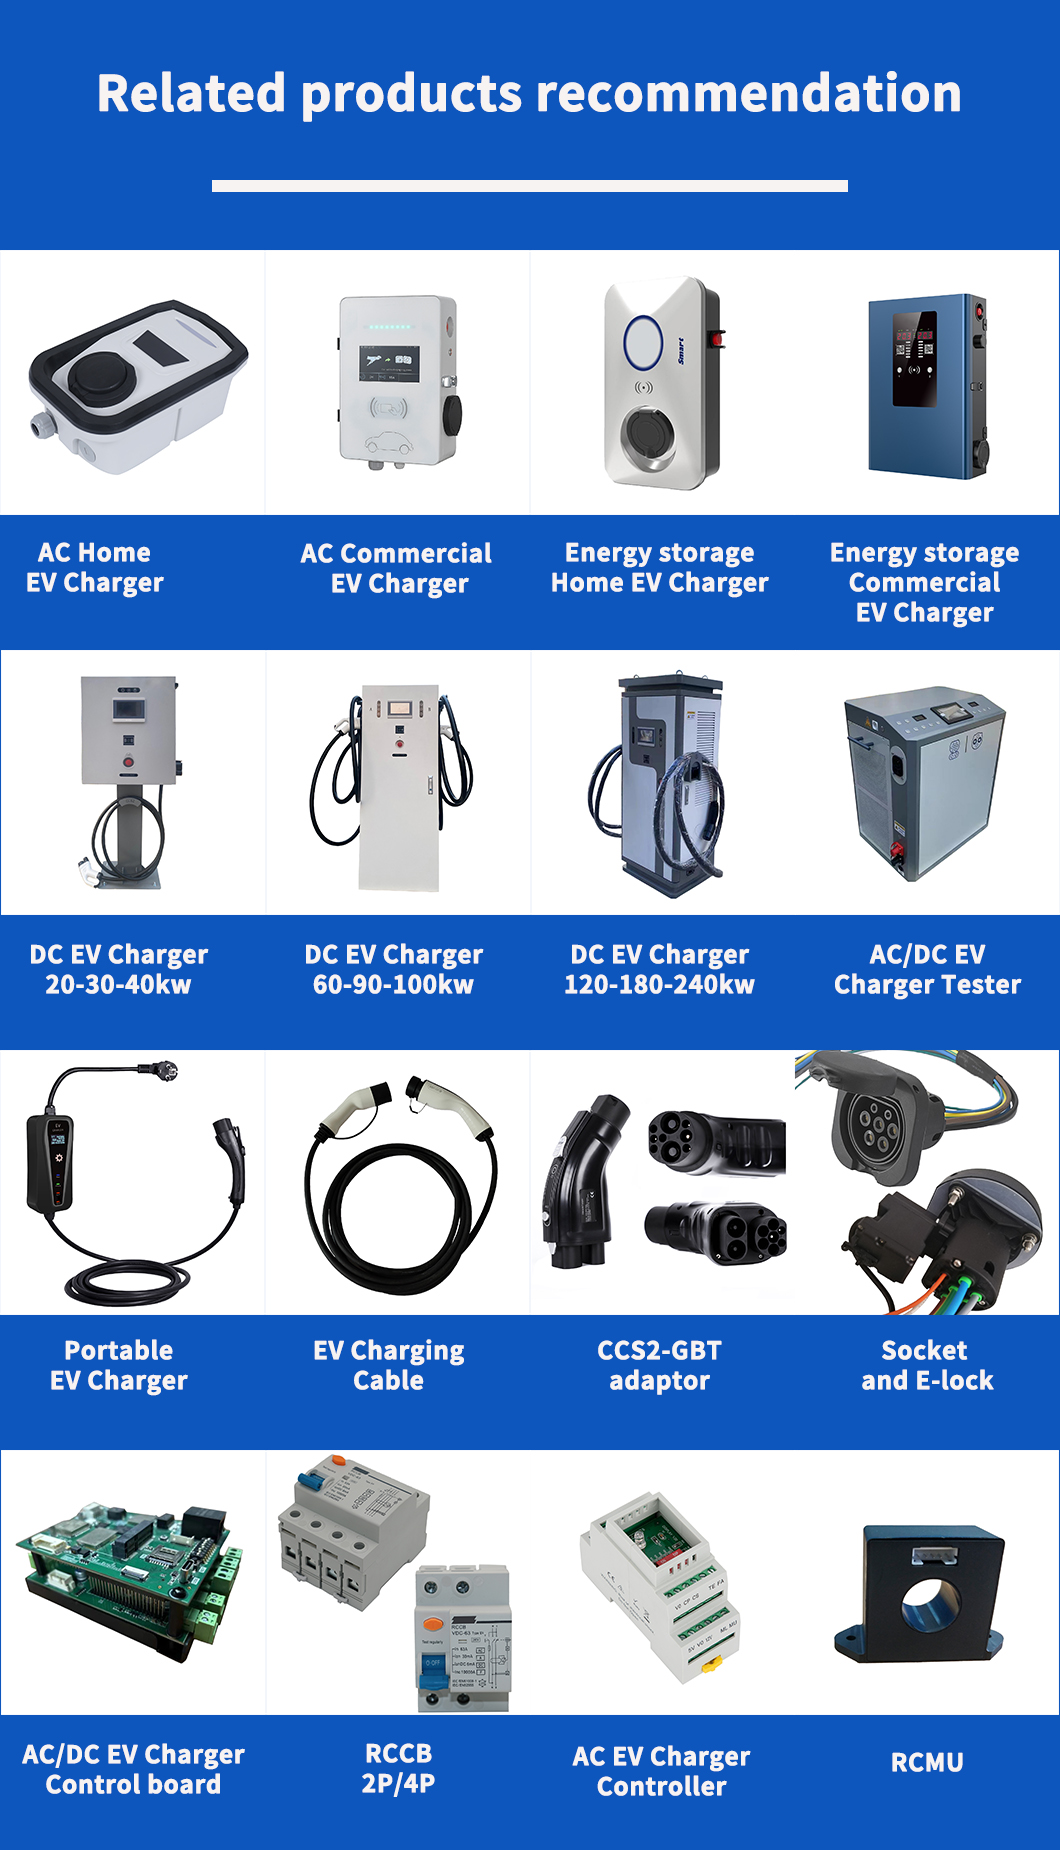 AC EV Charger Controller Related products